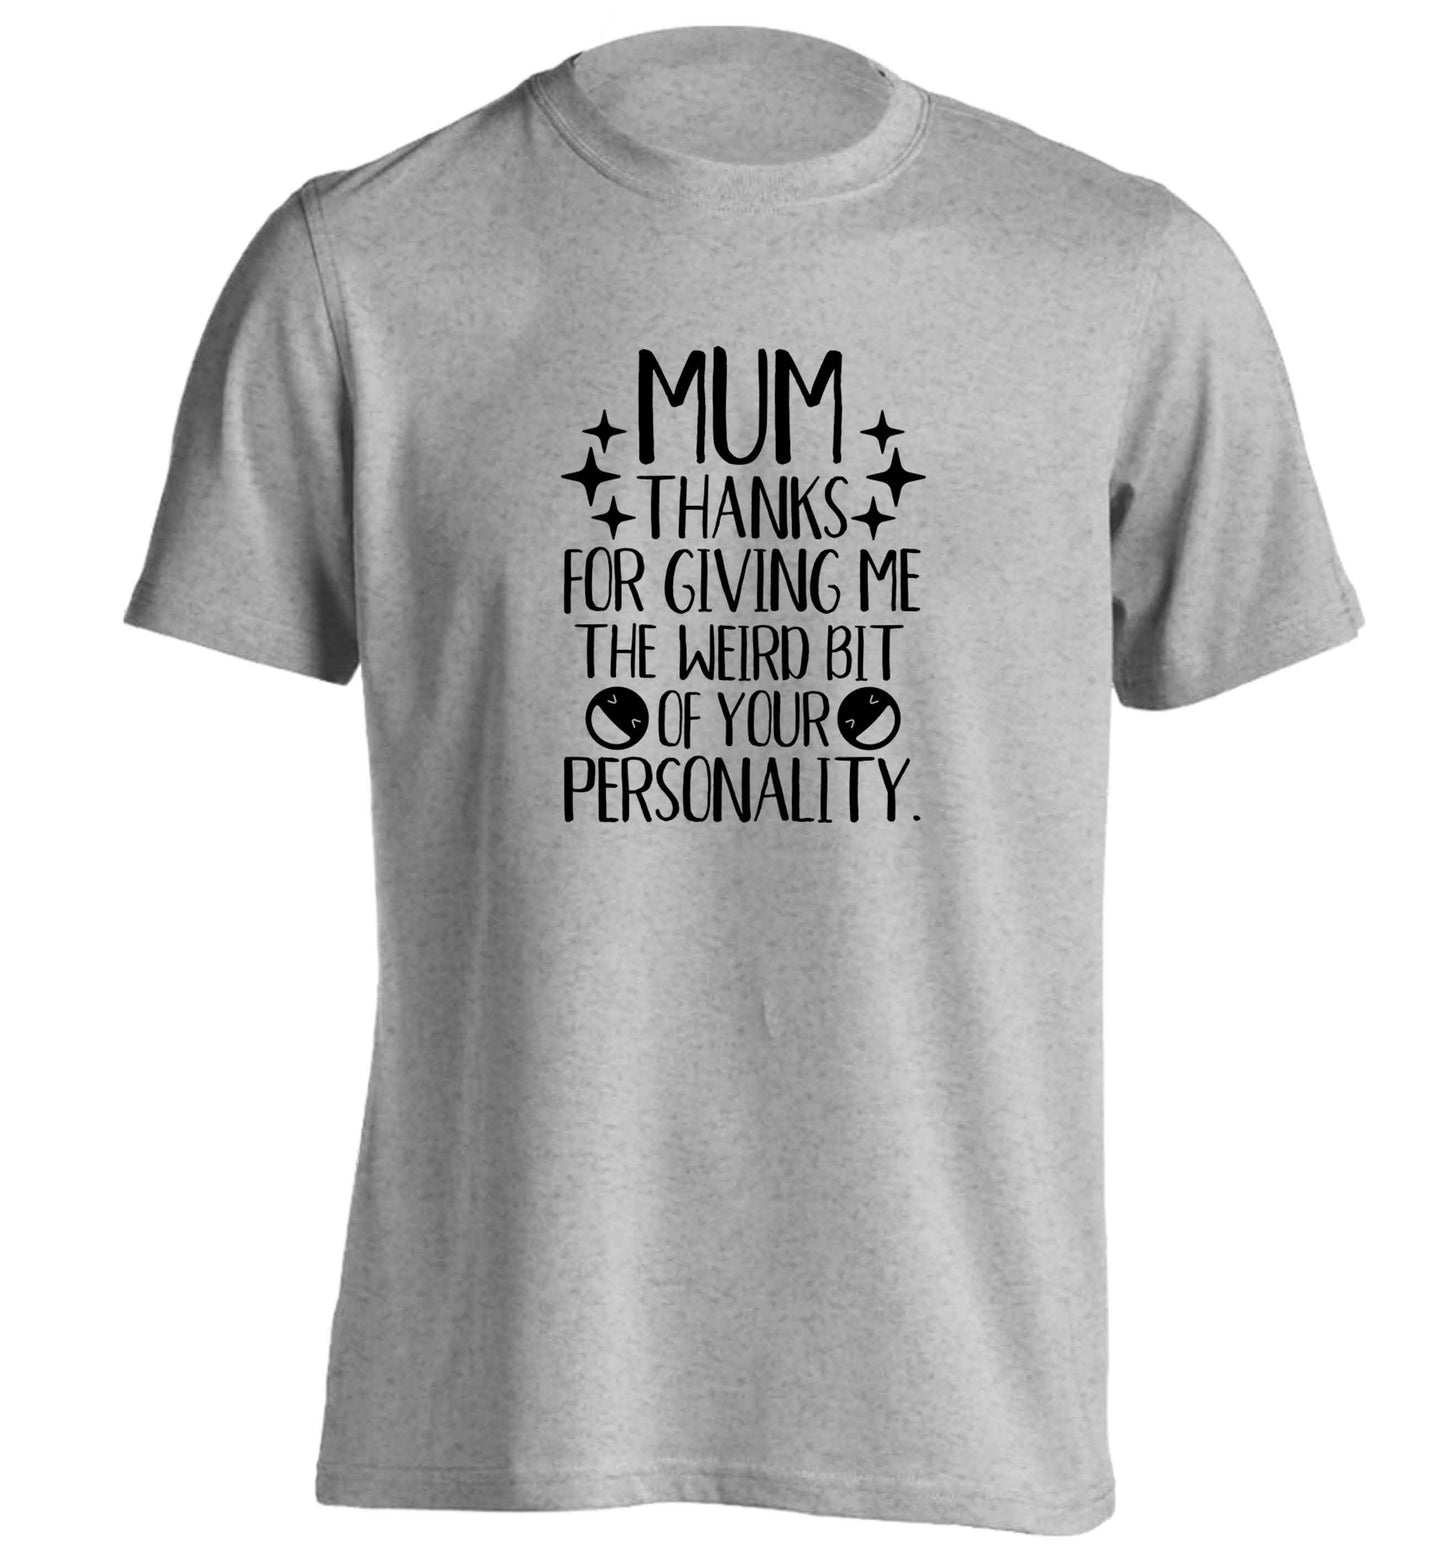 Mum, I love you more than halloumi and if you know me at all you know how deep that is adults unisex grey Tshirt 2XL